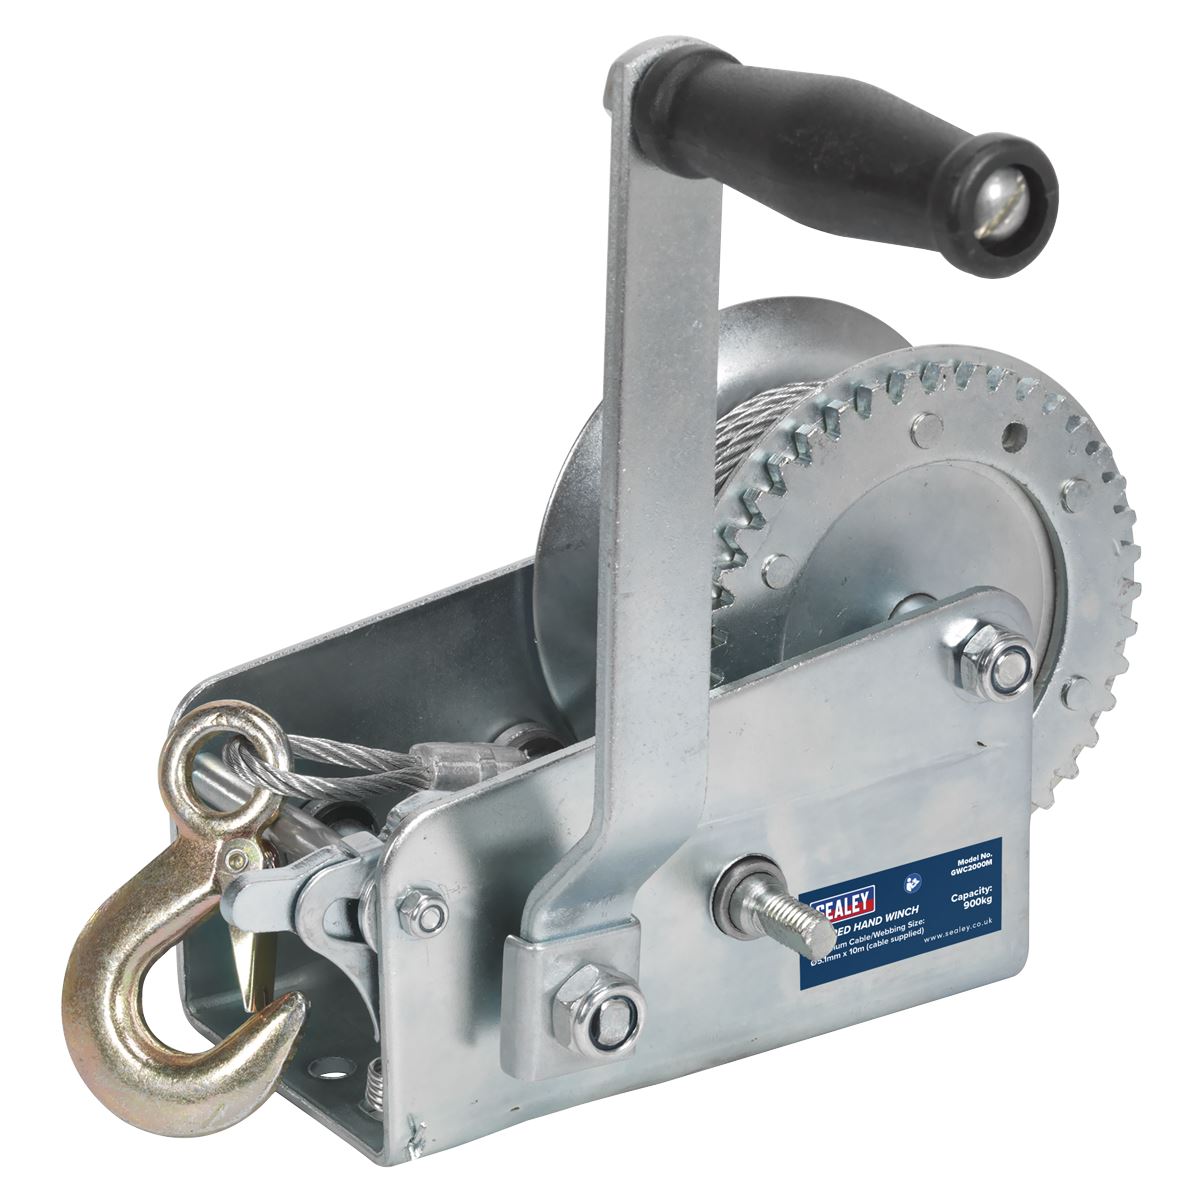 Sealey Geared Hand Winch 900kg Capacity with Cable